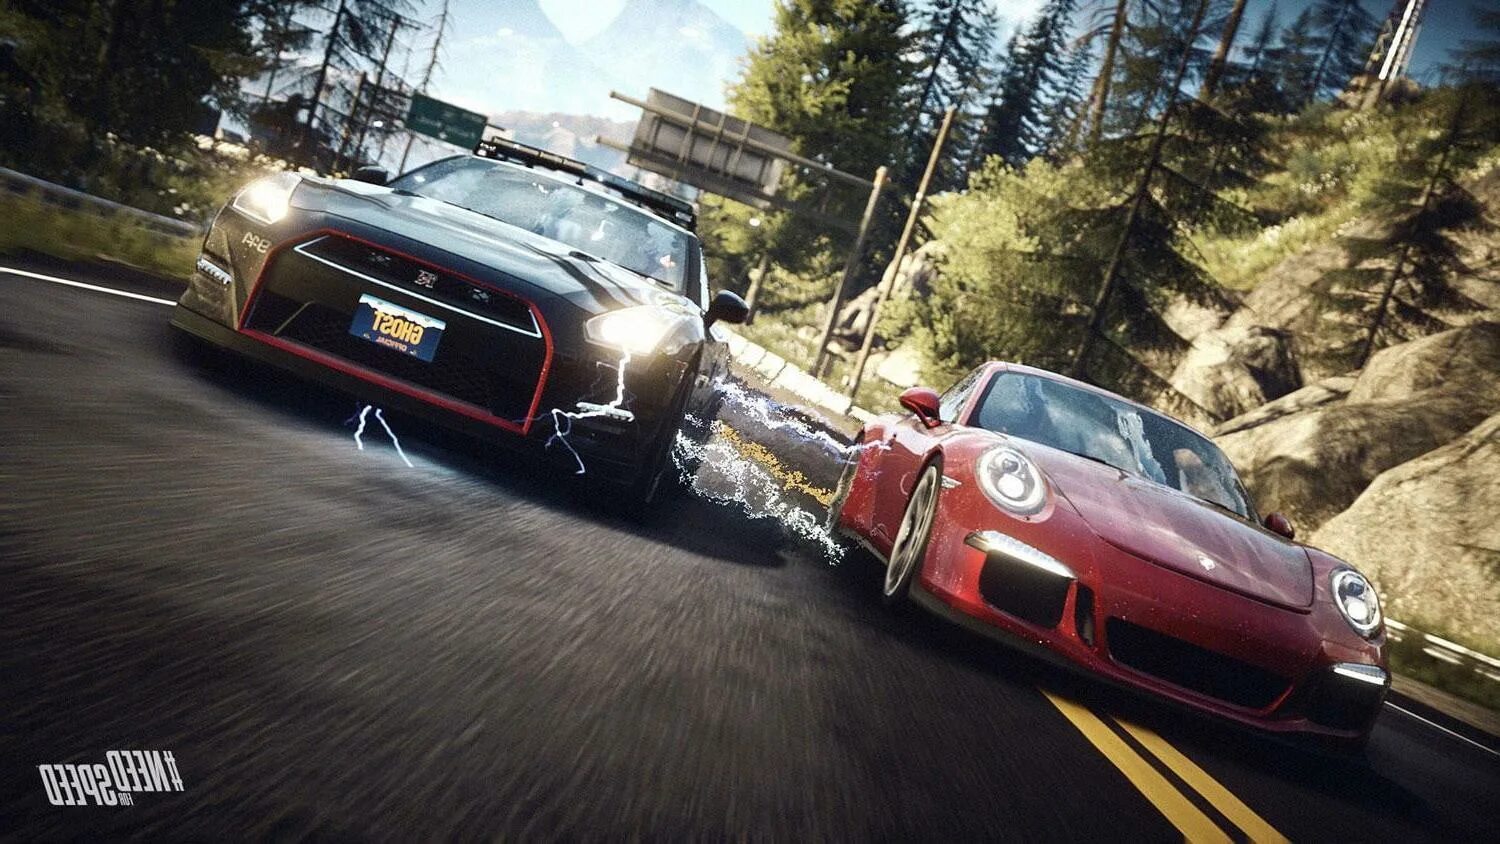 All car game. Игра NFS Rivals. Need for Speed Rivals Xbox 360. Need for Speed Rivals 2013 год. Гонки NFS Rivals.